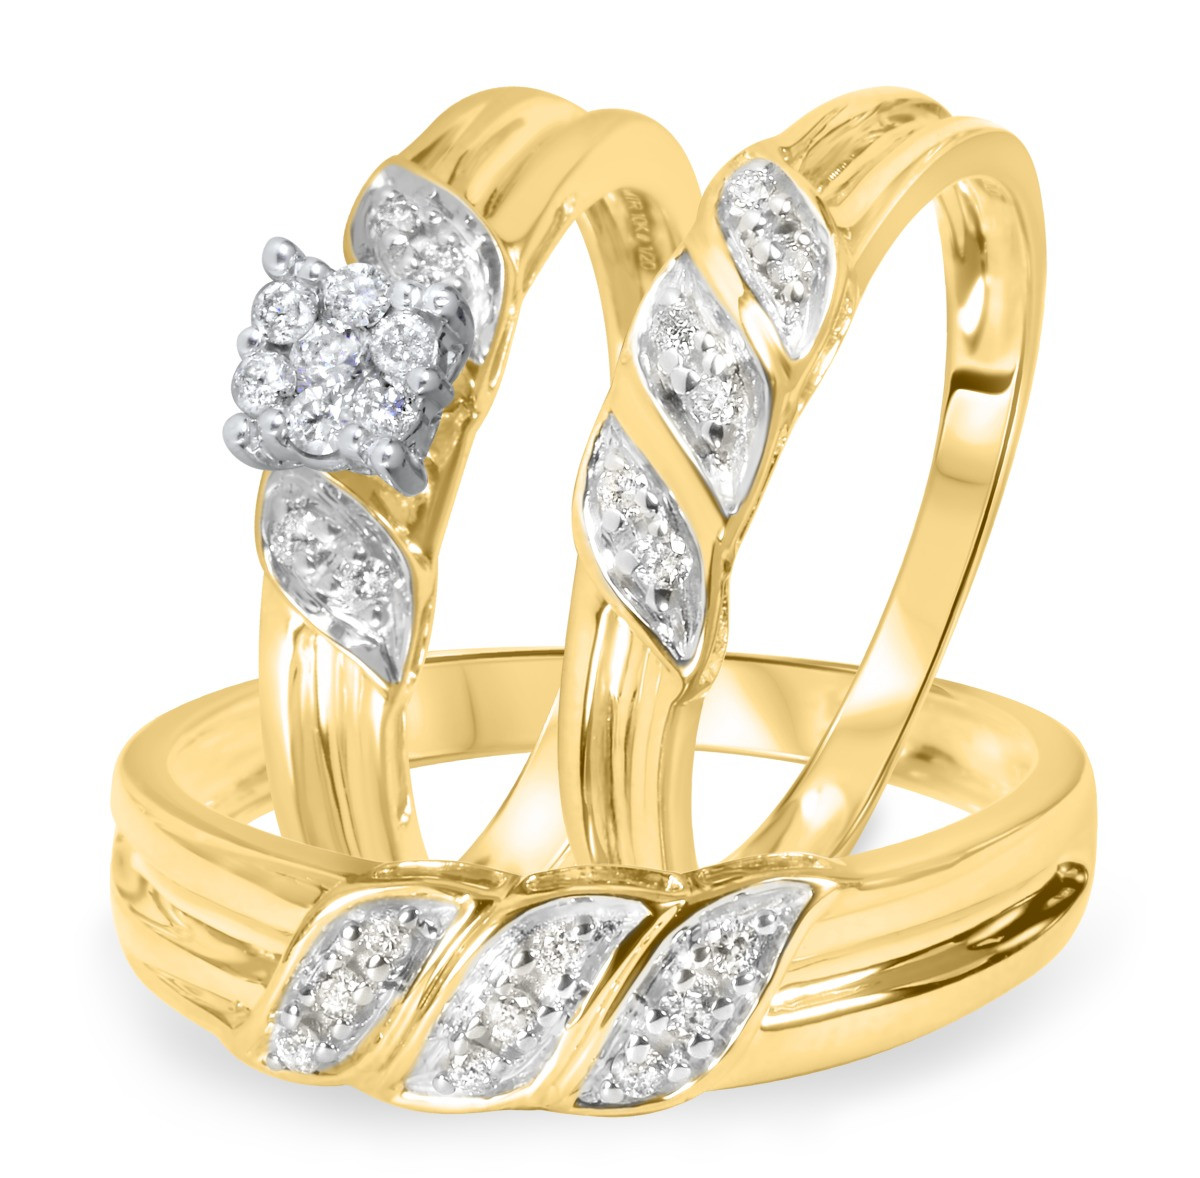 21 Best Fingerhut Wedding Rings Home, Family, Style and